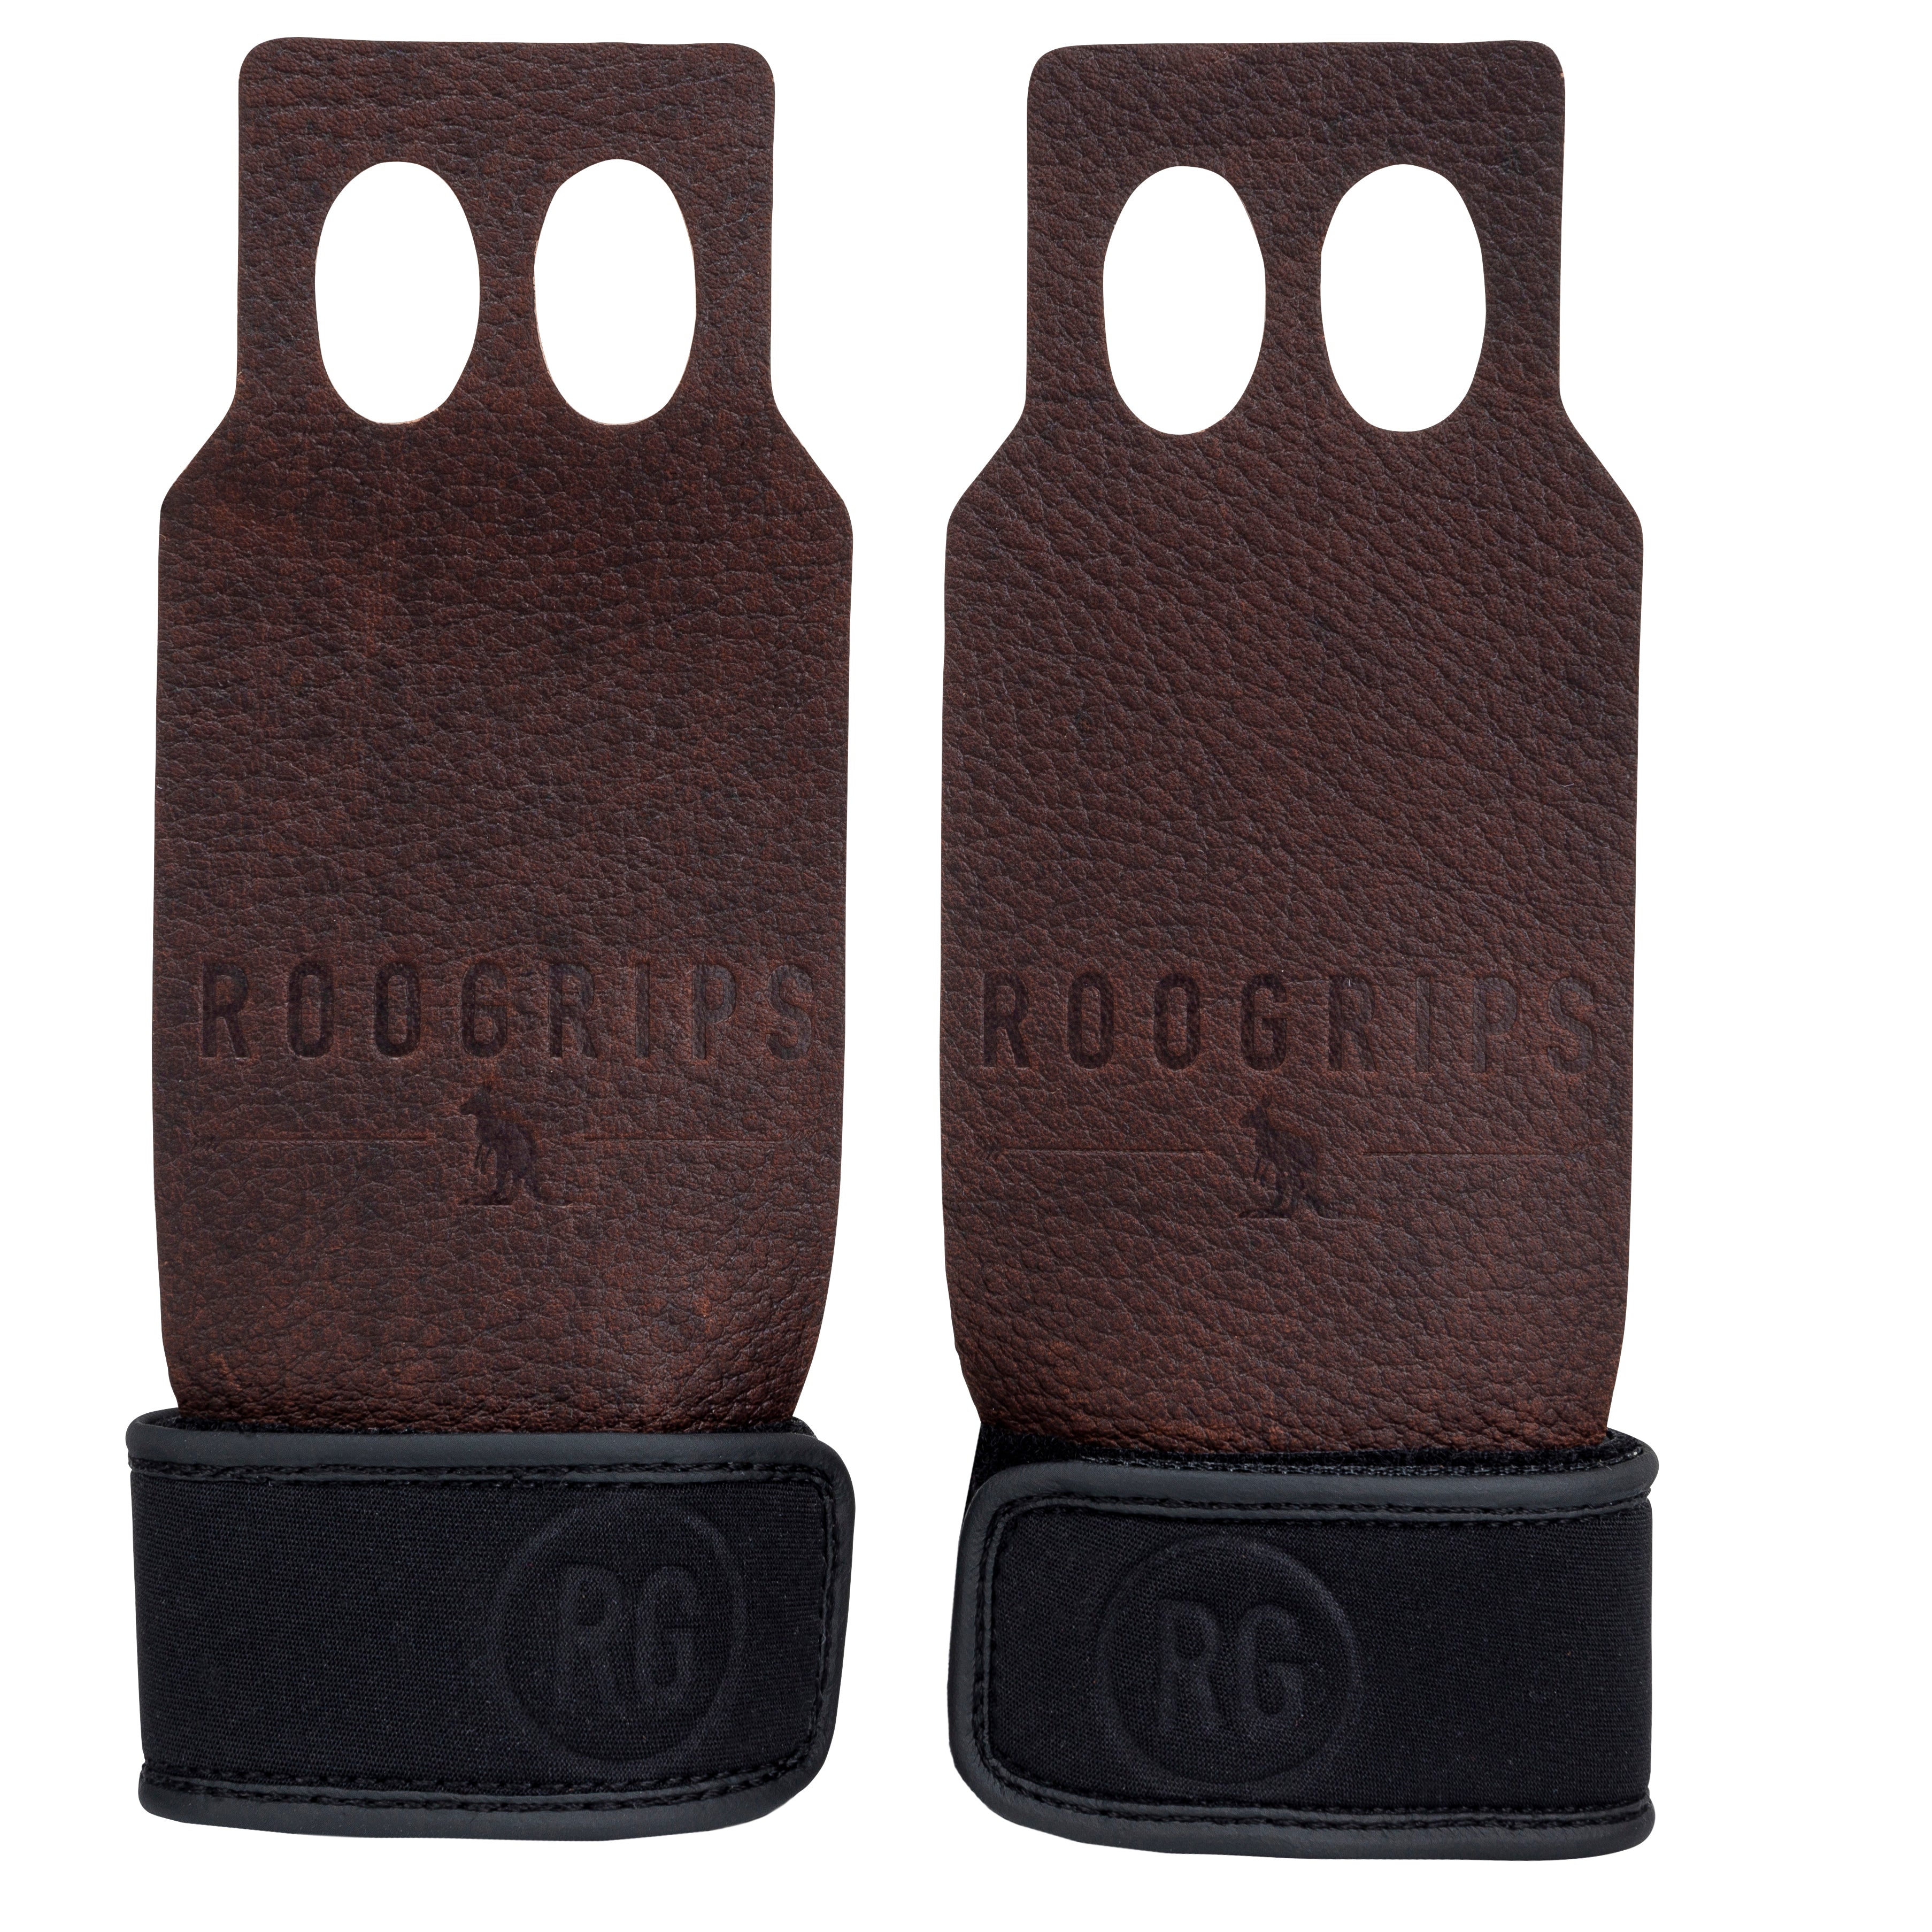 2 Finger Protective Leather Hand Grips Mocha